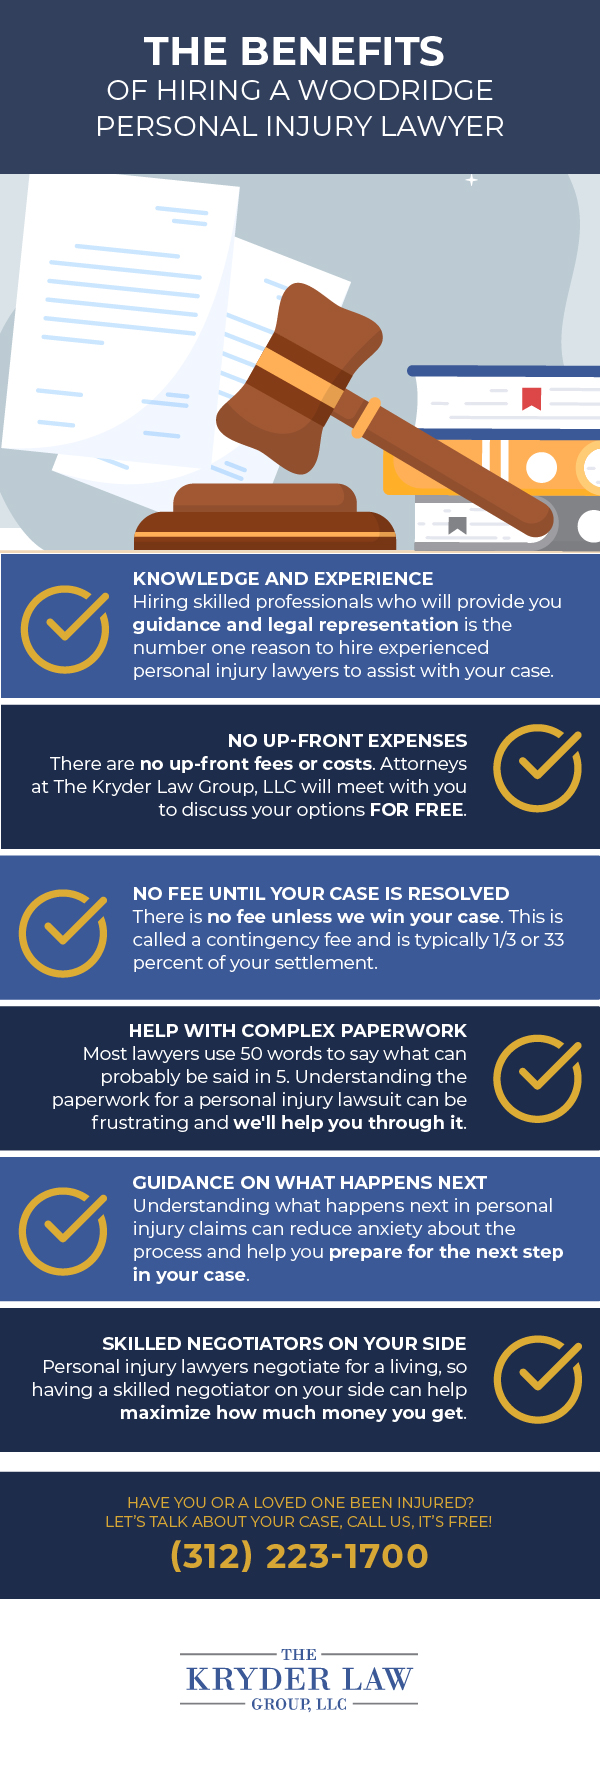 The Benefits of Hiring a Woodridge Personal Injury Lawyer Infographic